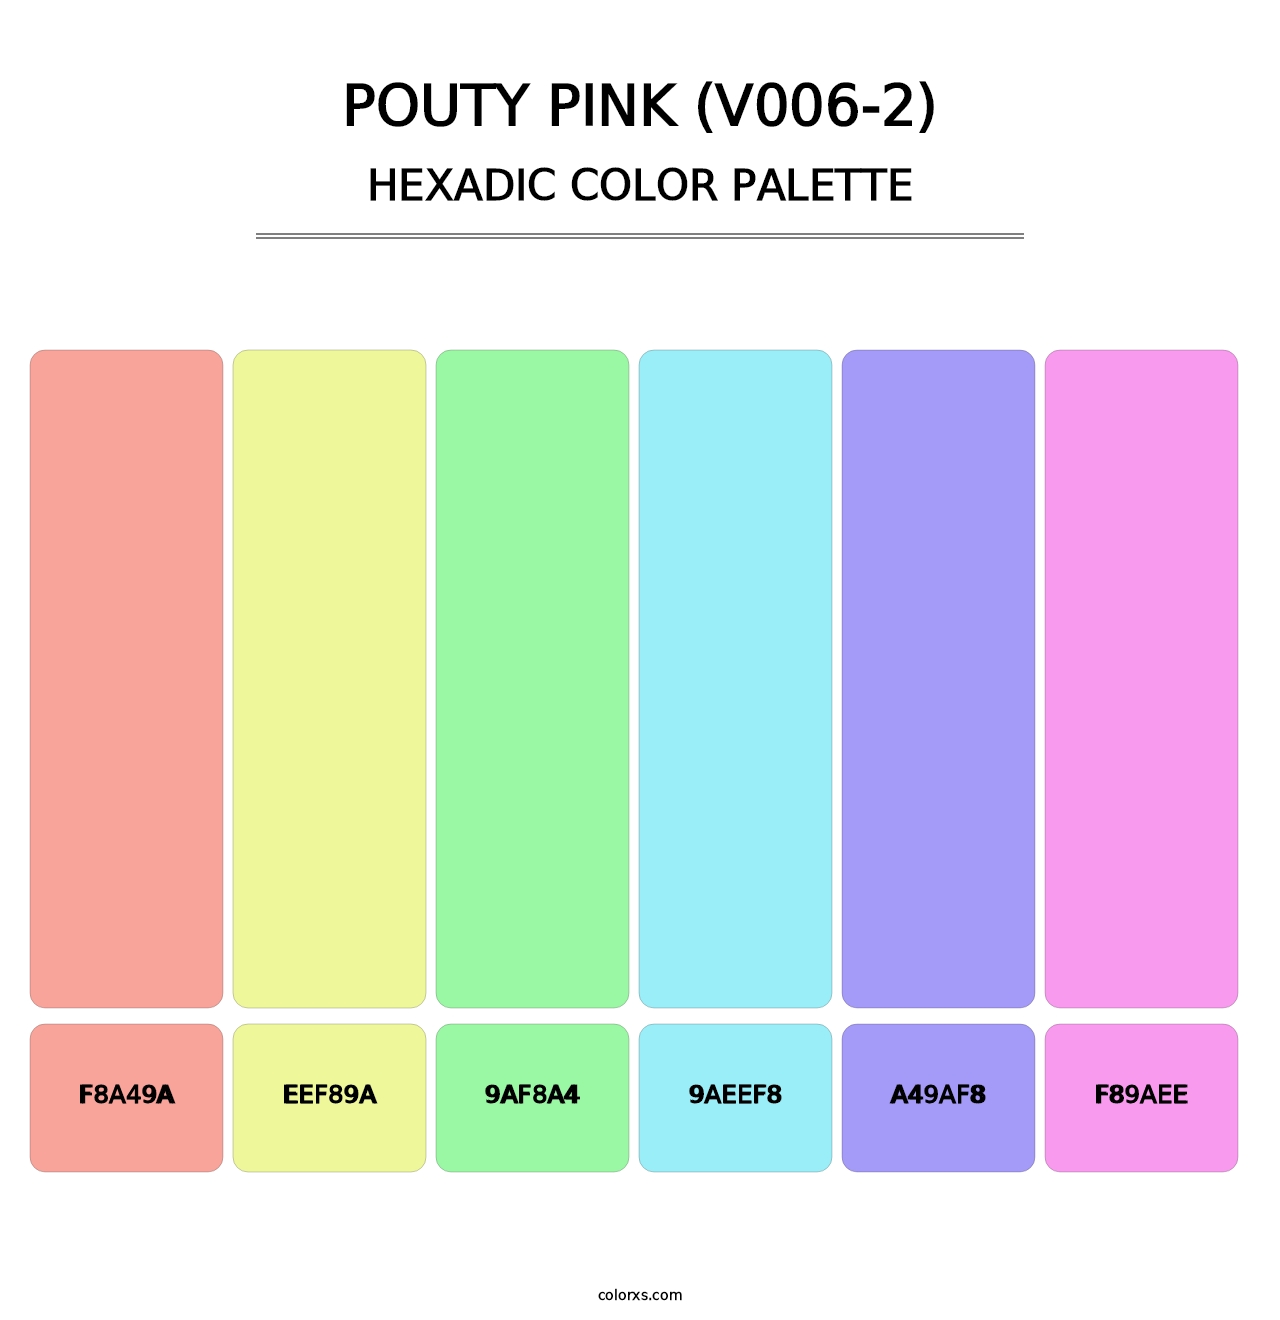 Pouty Pink (V006-2) - Hexadic Color Palette